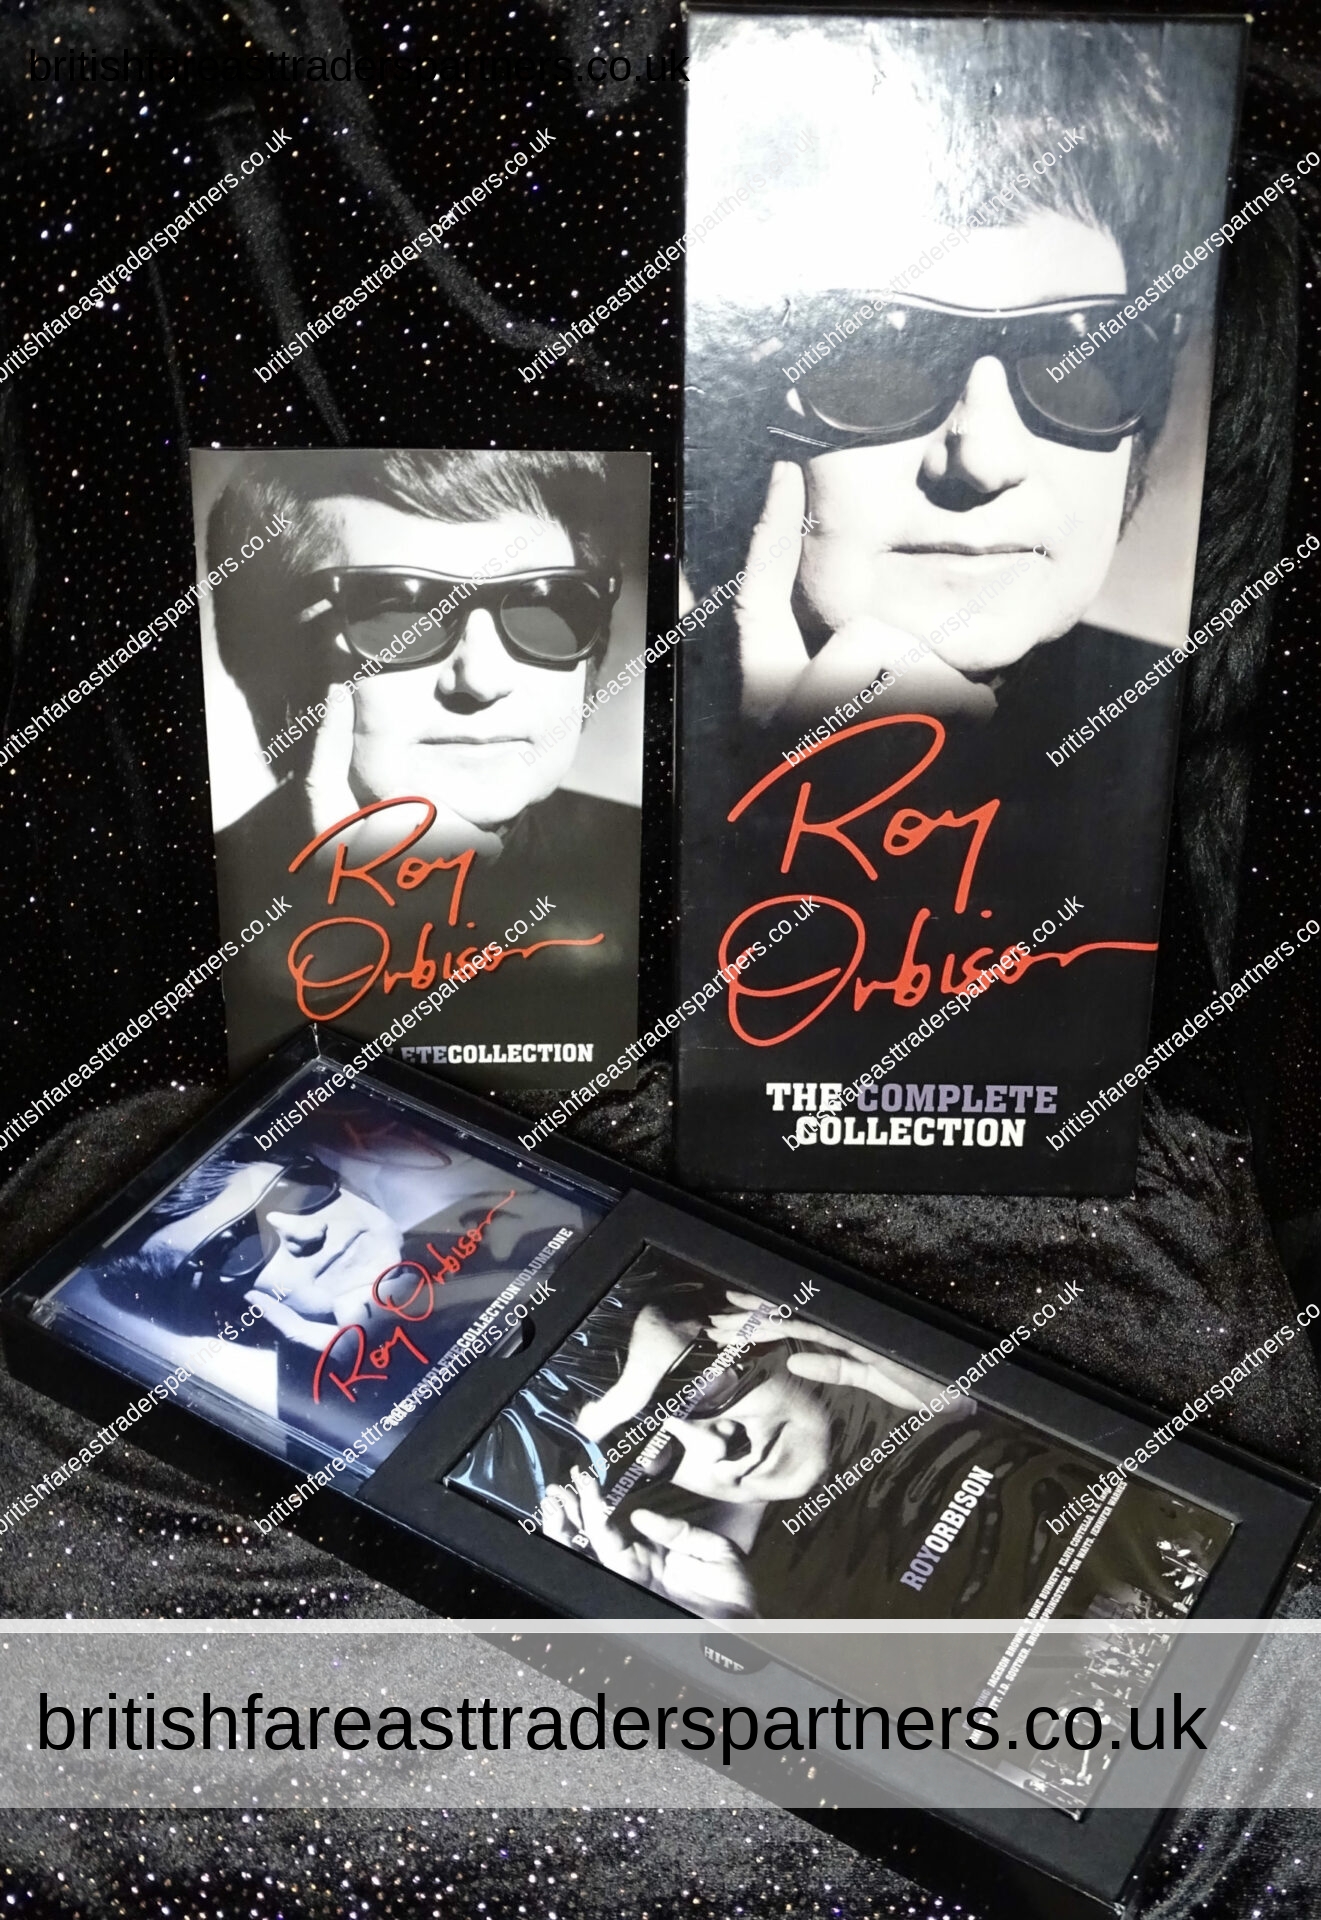 ROY ORBISON The Complete Collection Boxed Set: 2 Audio CDs + 1 Video Tape + 1 Booklet VGC